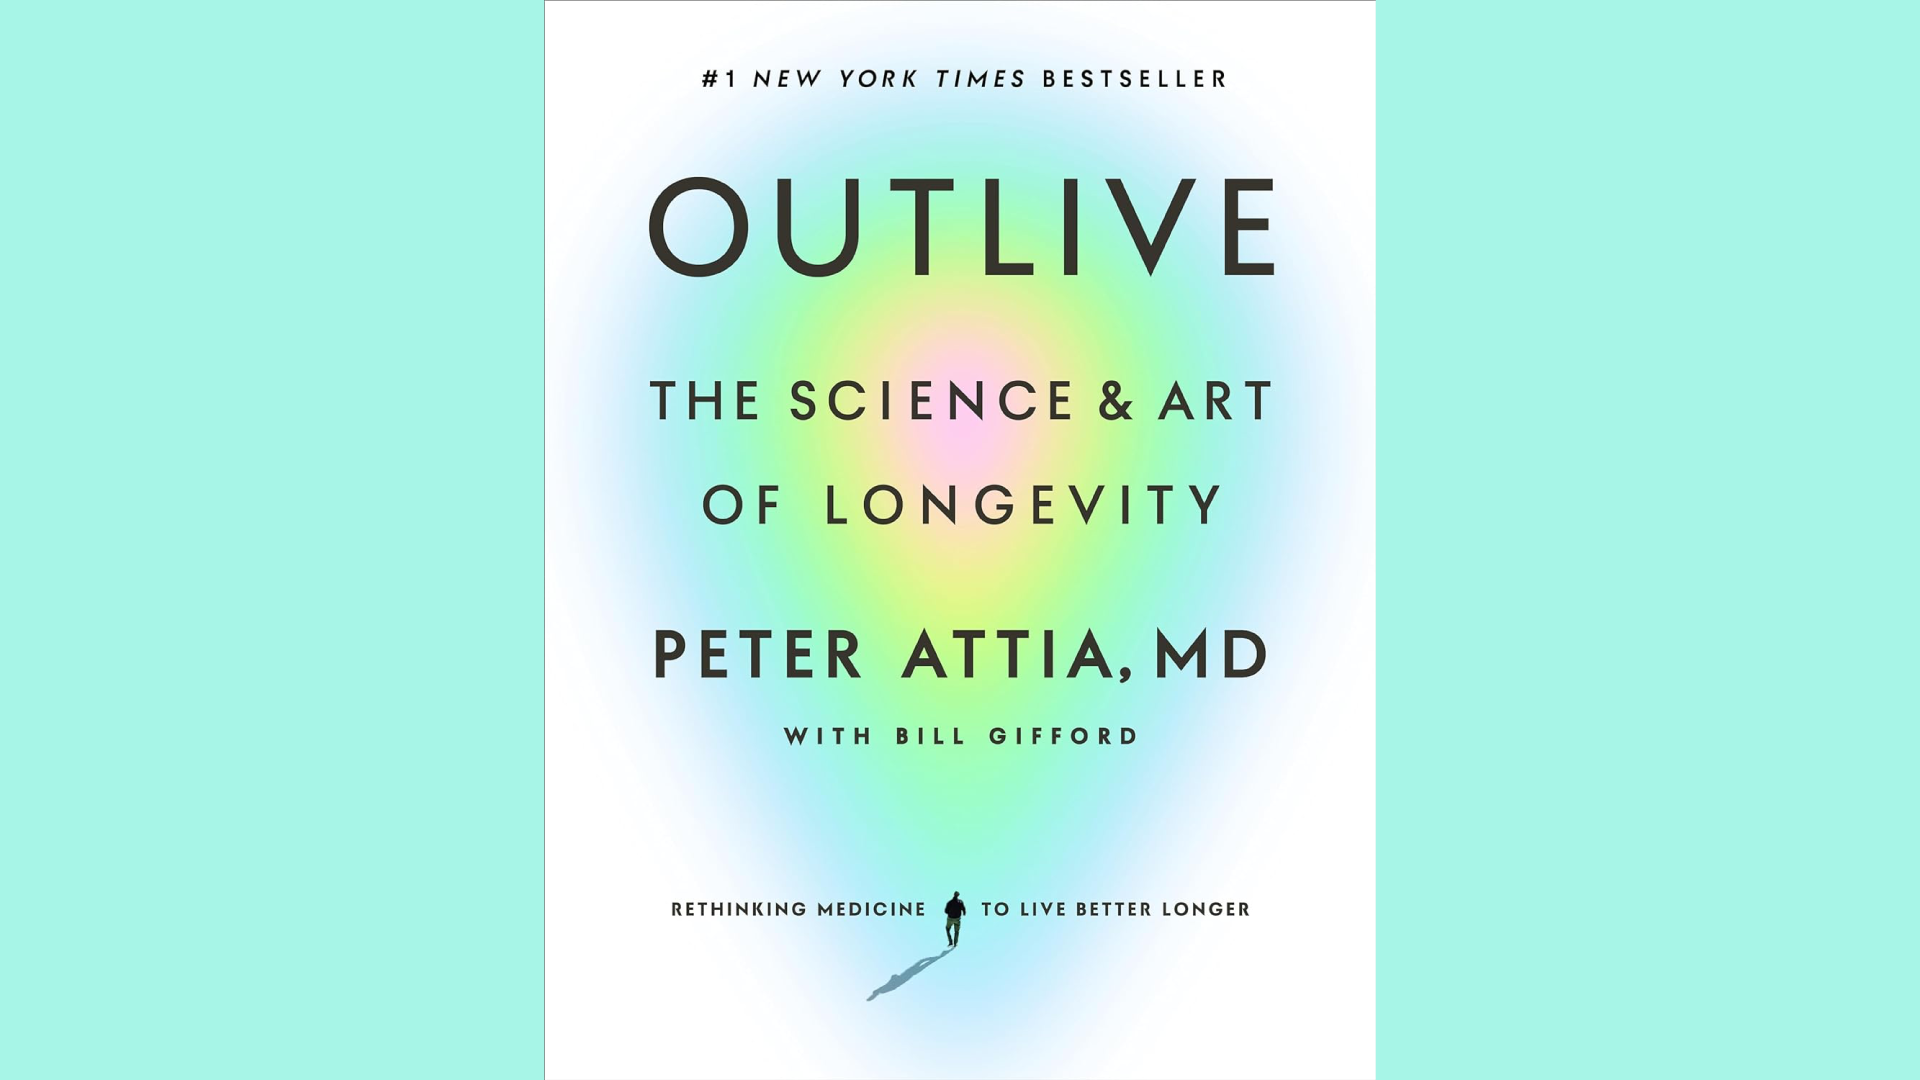 Summary: Outlive by Peter Attia